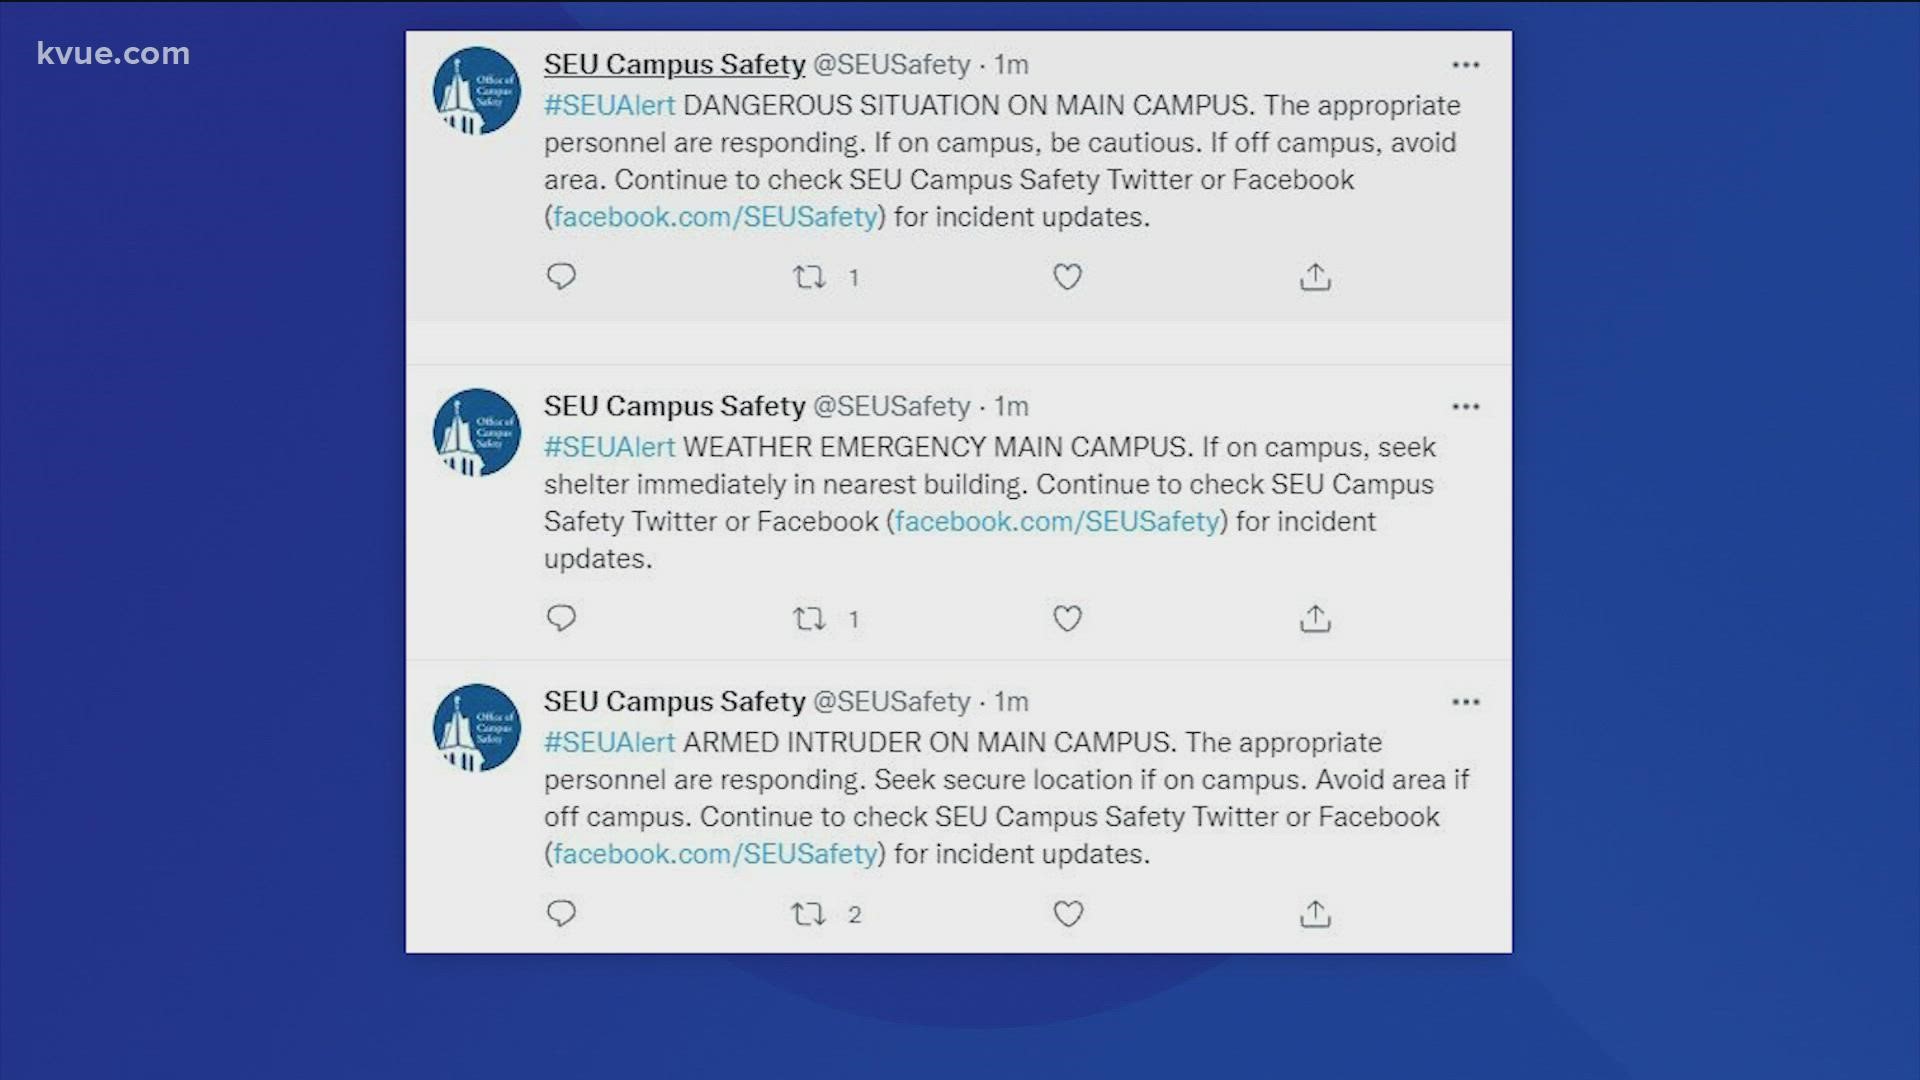 The first message stated that there was a dangerous situation on campus. Two more were sent for an armed intruder and a weather emergency.